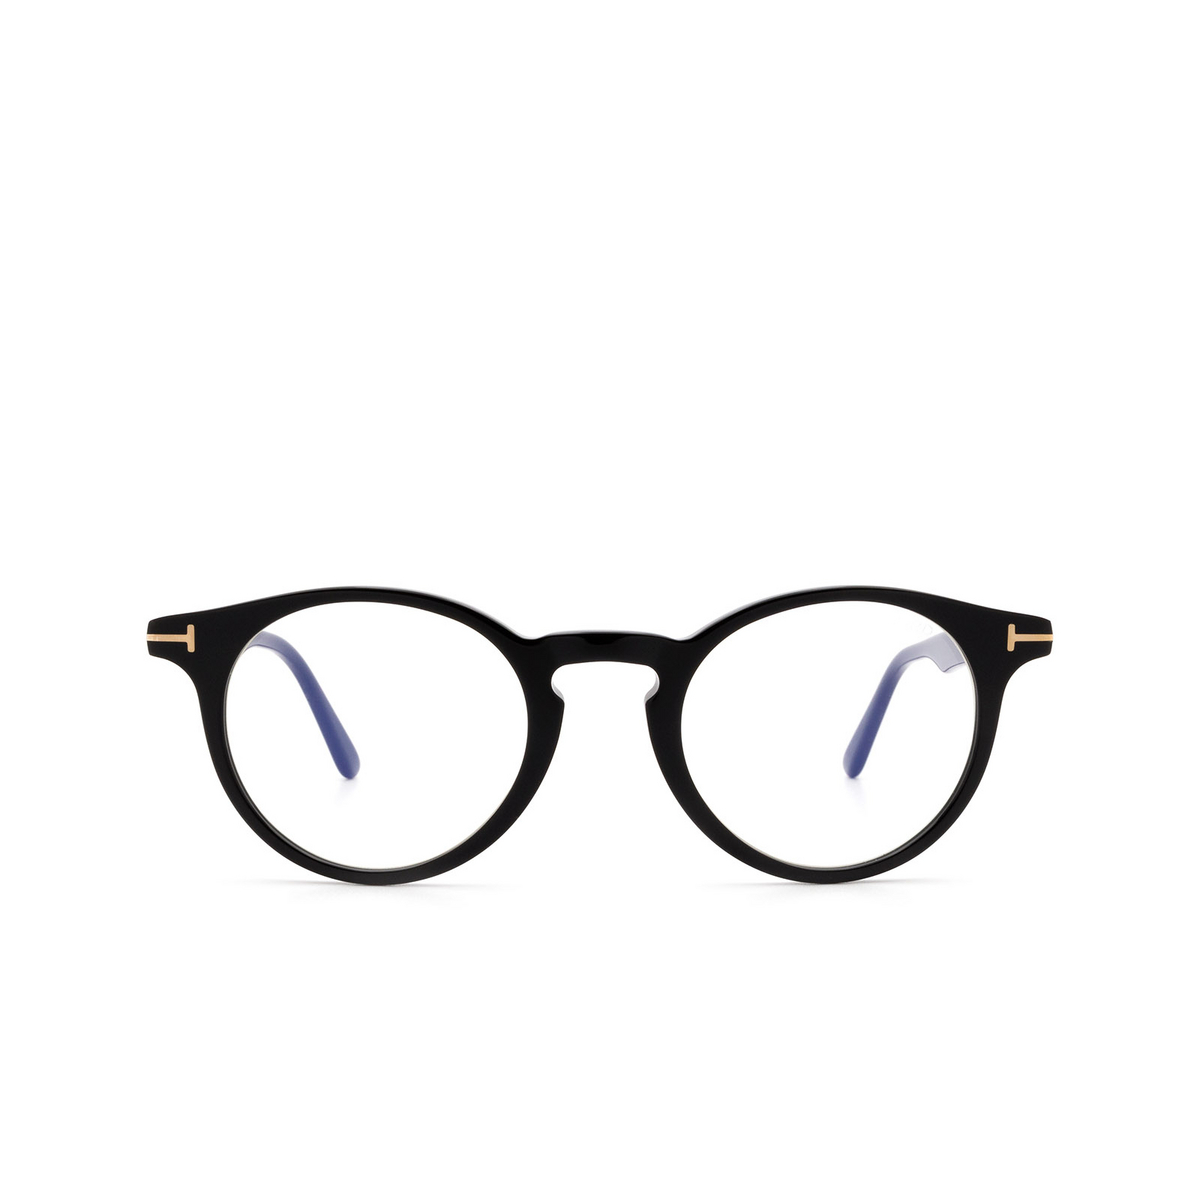 Tom Ford® Round Eyeglasses: FT5557-B color Shiny Black 001 - front view.